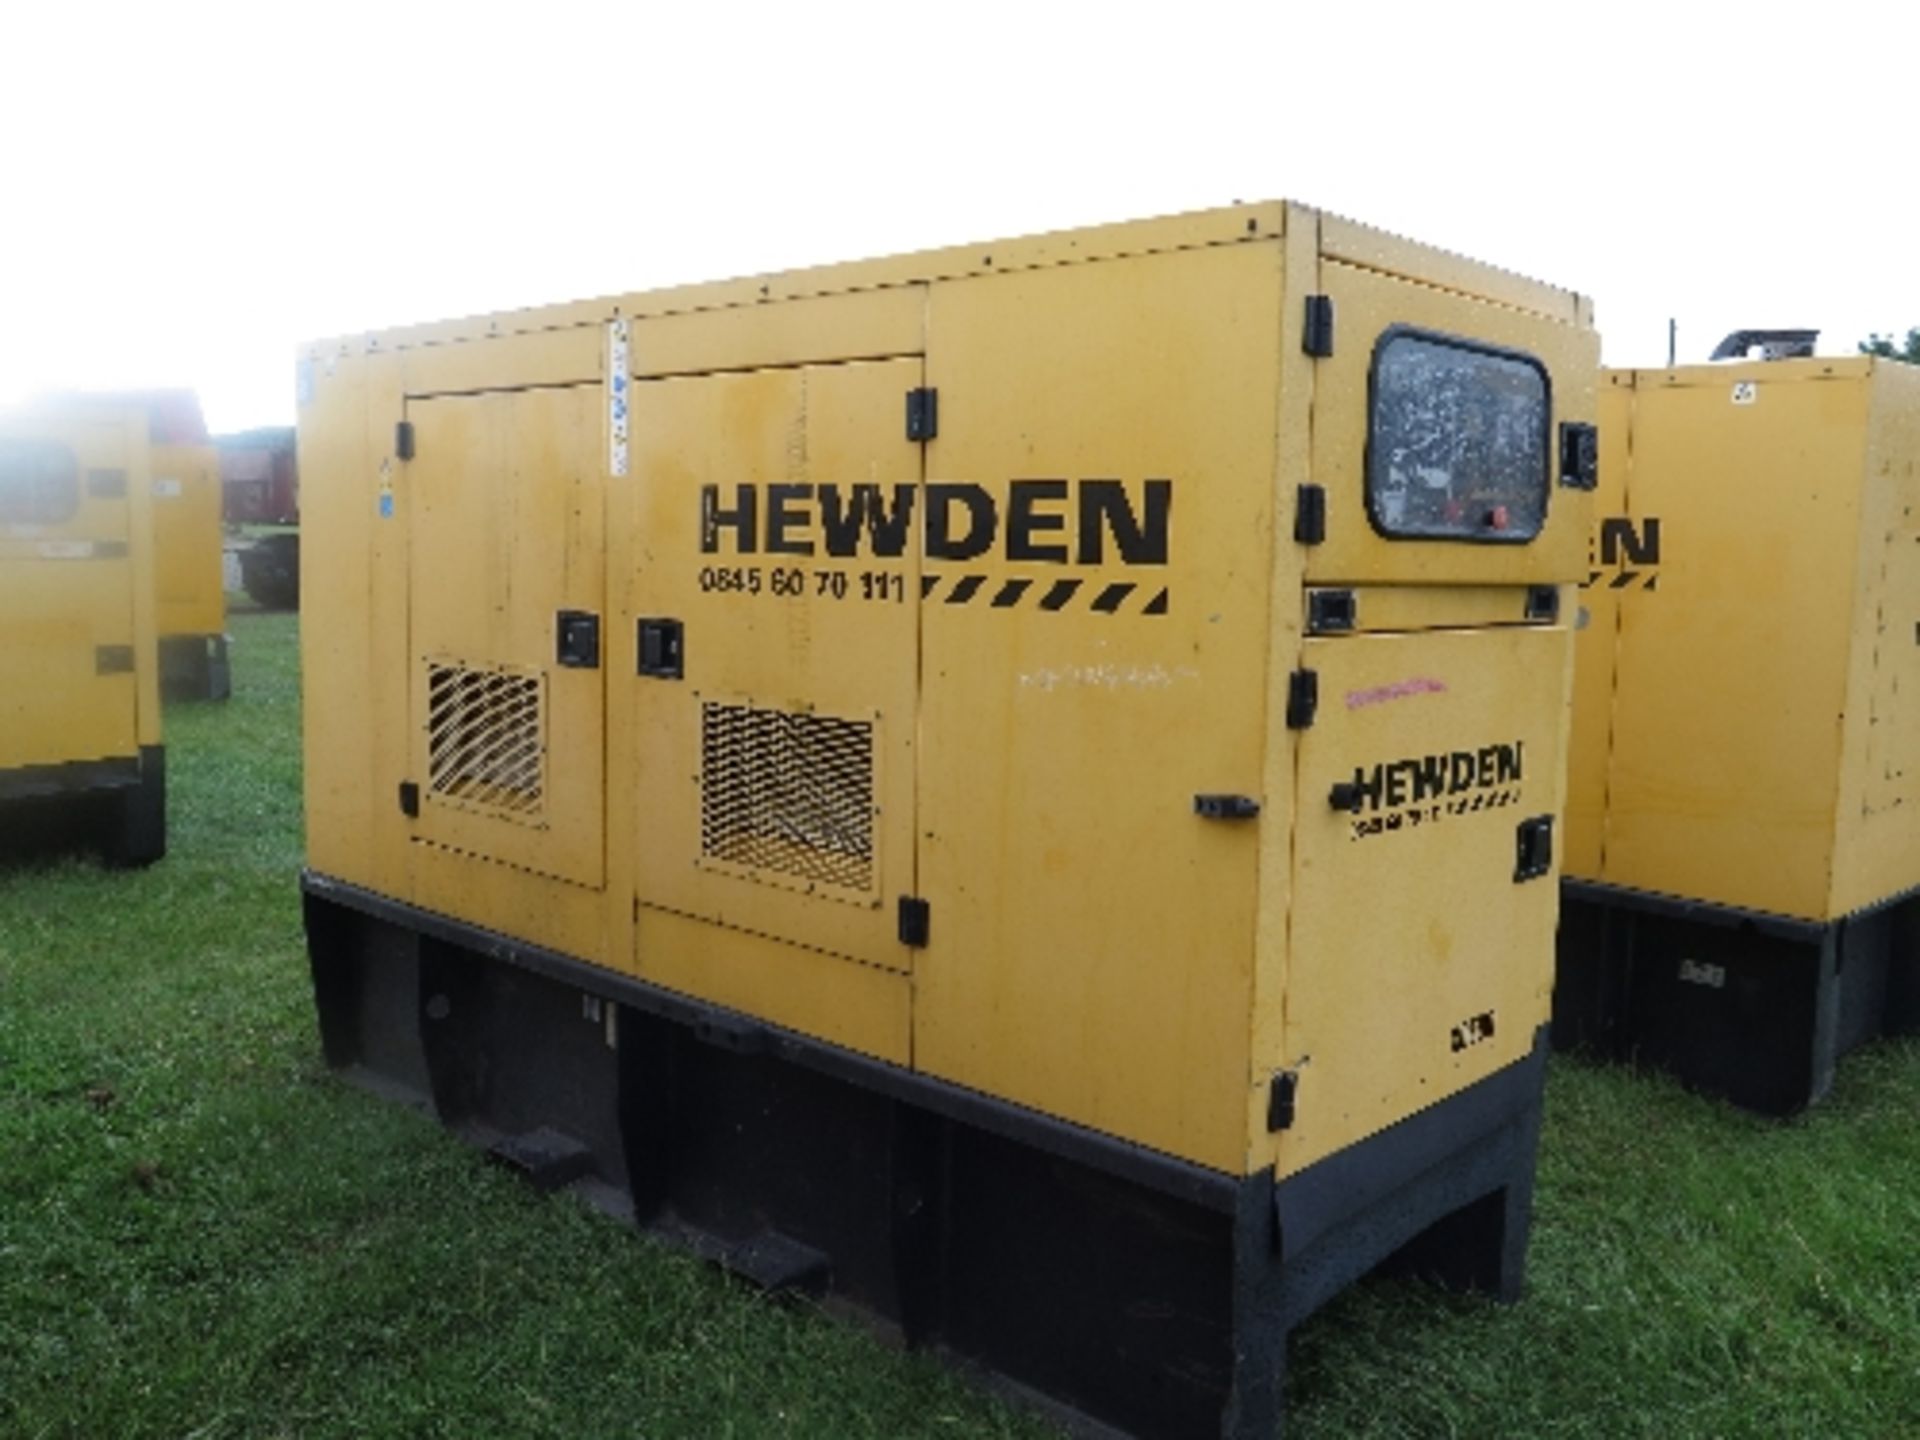 Caterpillar XQE80 generator 15335 hrs 157815
PERKINS - RUNS AND MAKES POWER
ALL LOTS are SOLD AS